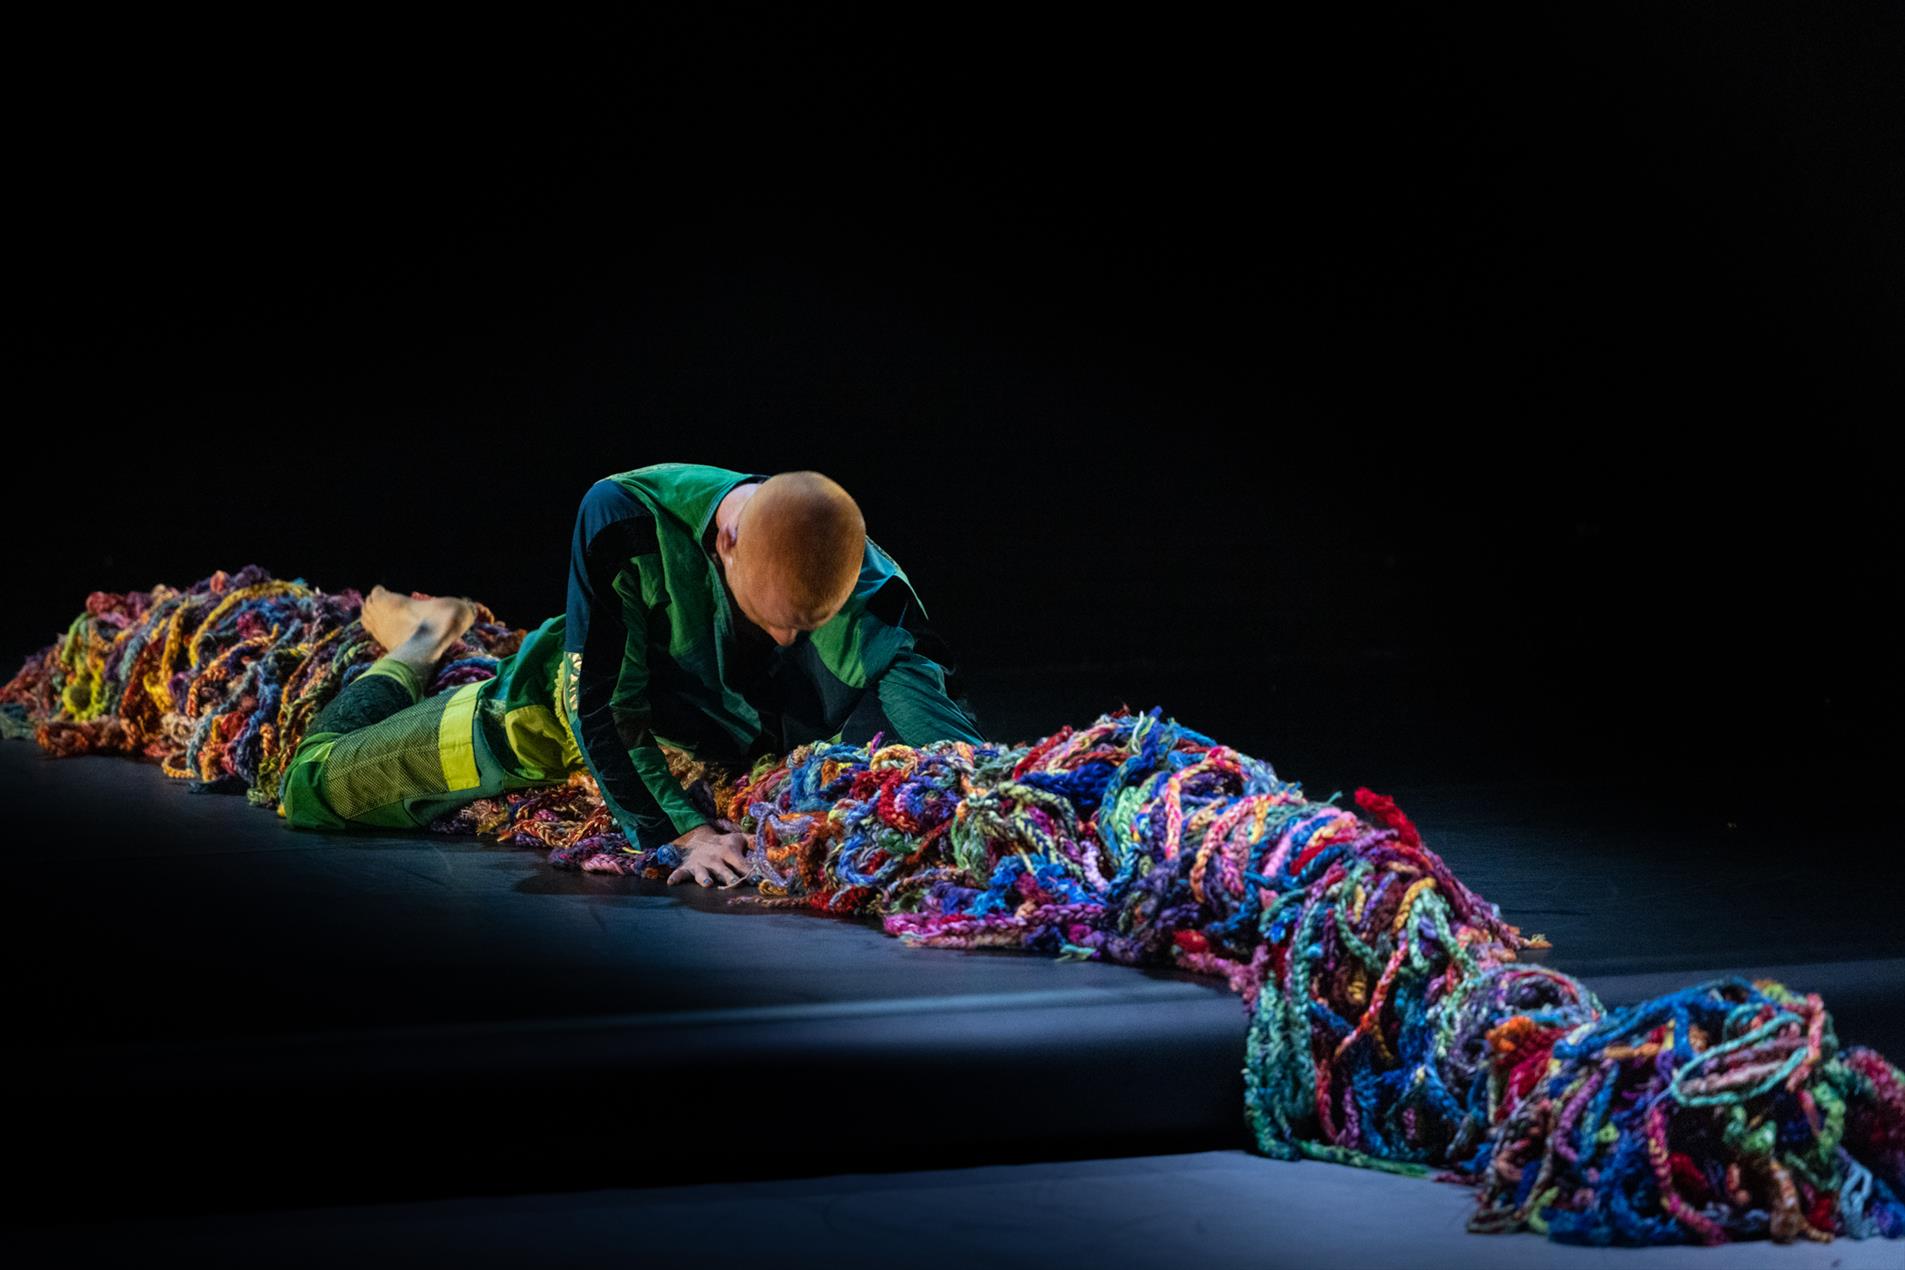 A male dancer laying on colourful wool performing on stage.